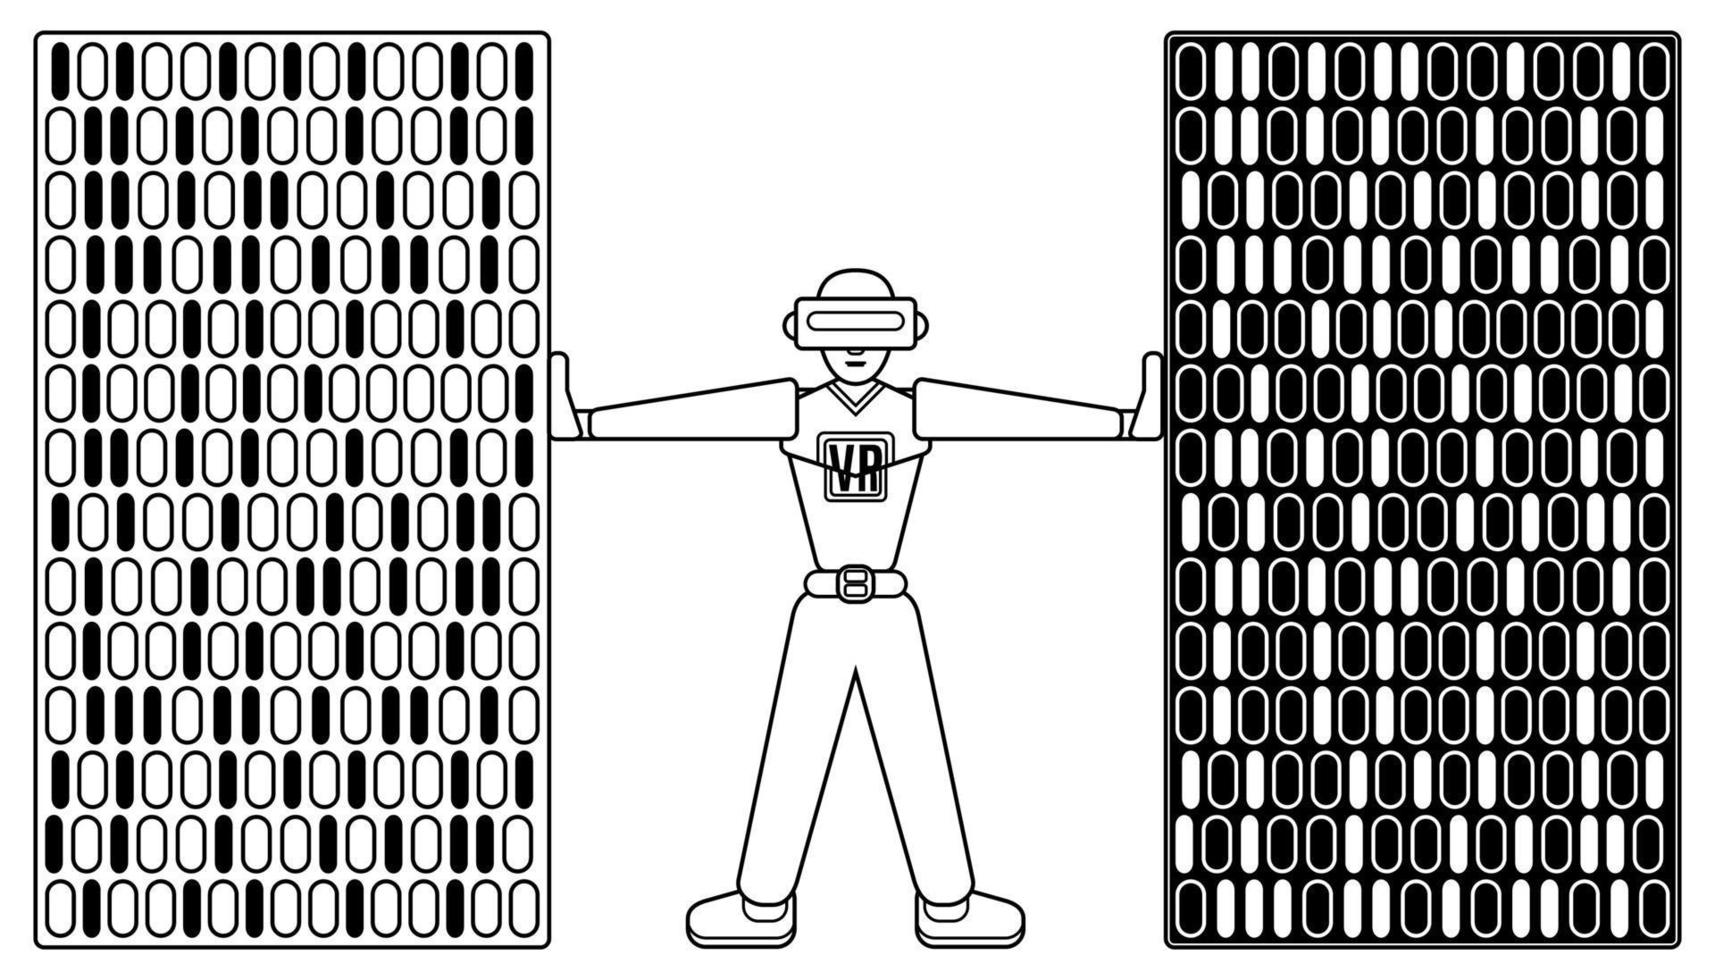 The hacker in virtual reality hacks the code vector